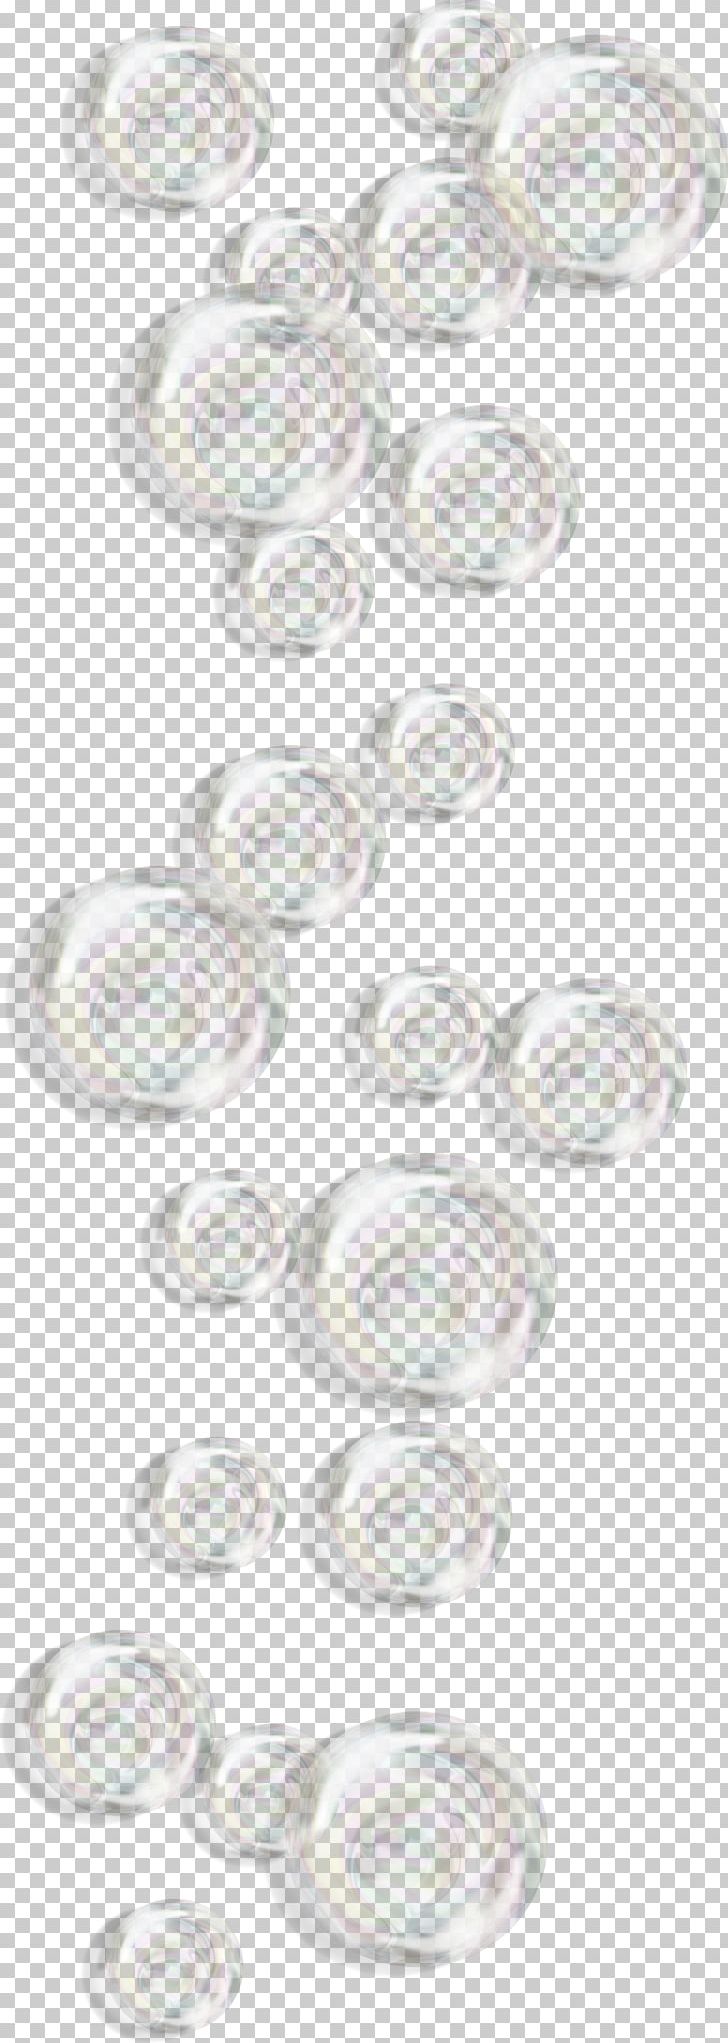 Circle Icon PNG, Clipart, Bird, Blister, Bubble, Bubbles, Circle Free PNG Download